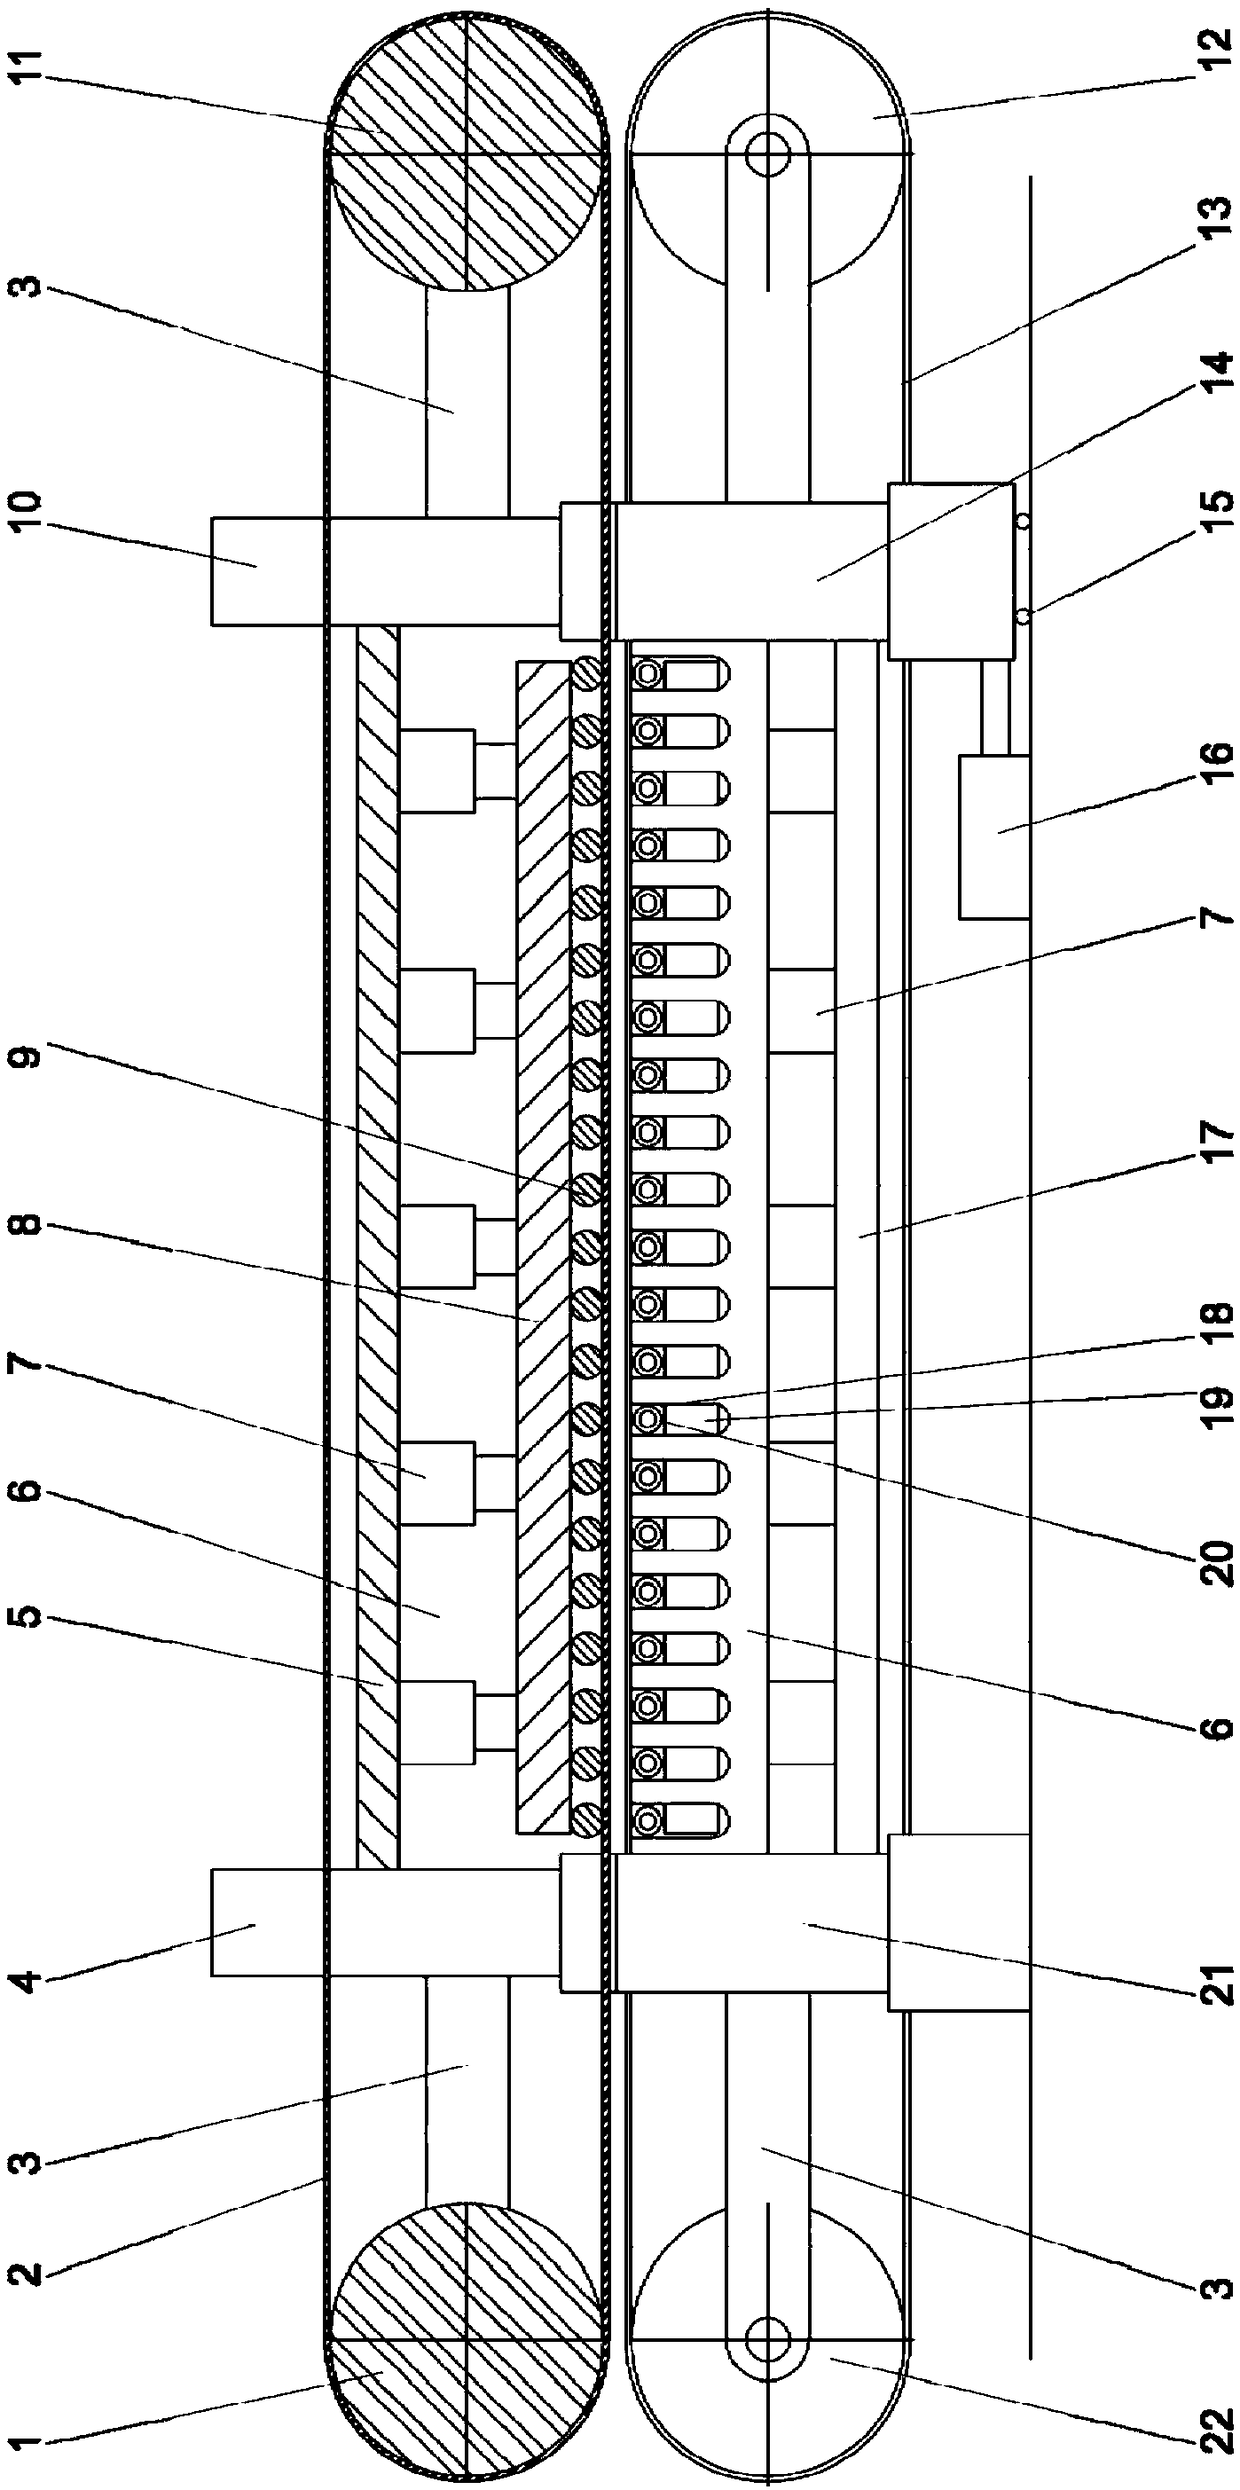 Continuous pressing device for composite materials